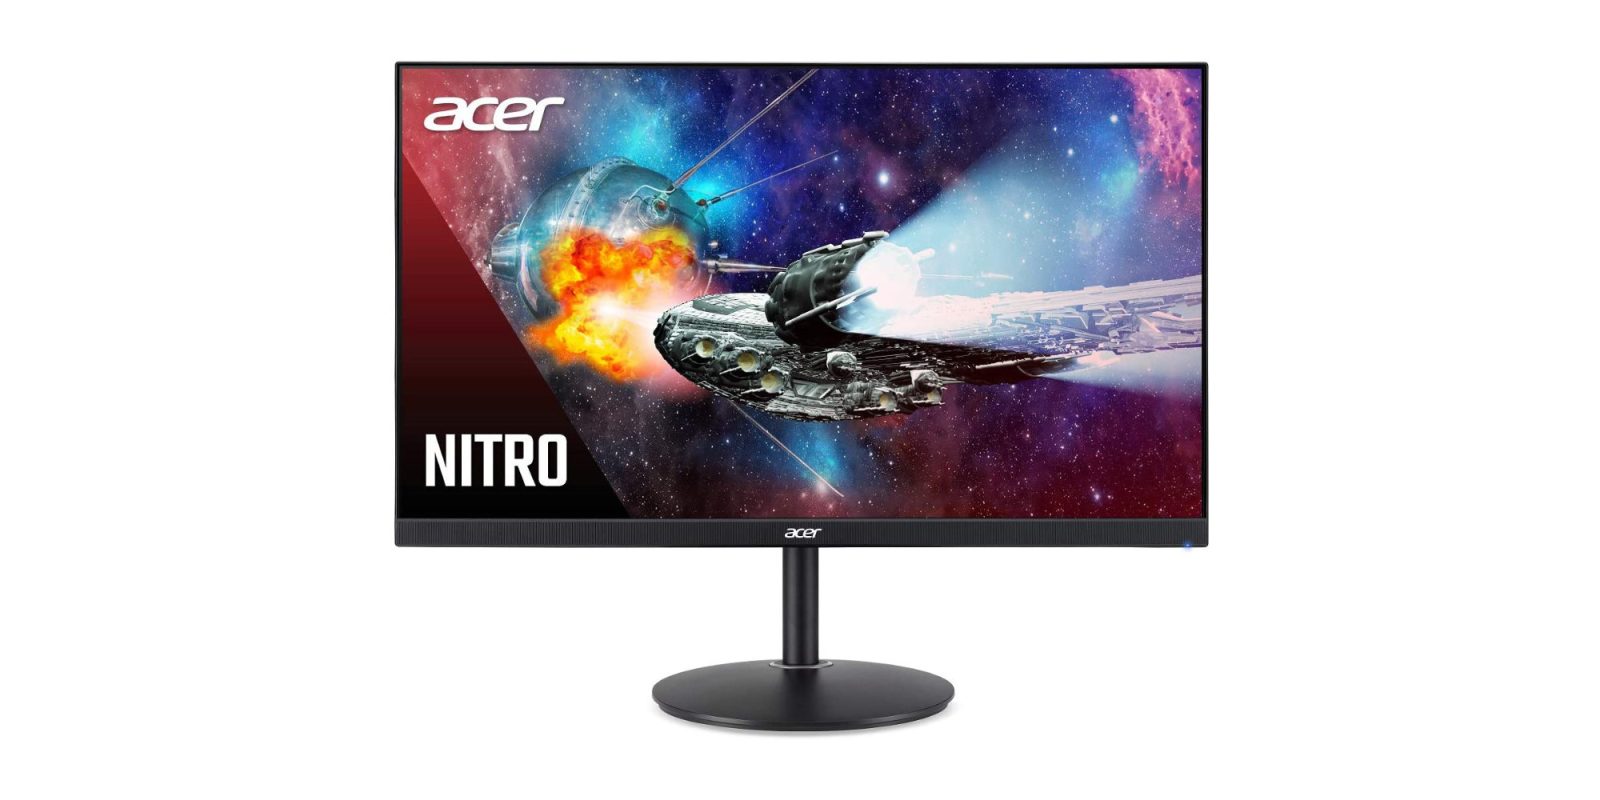 Upgrade To Acer S Nitro 27 Inch 240hz Monitor At 325 More From 230 9to5toys